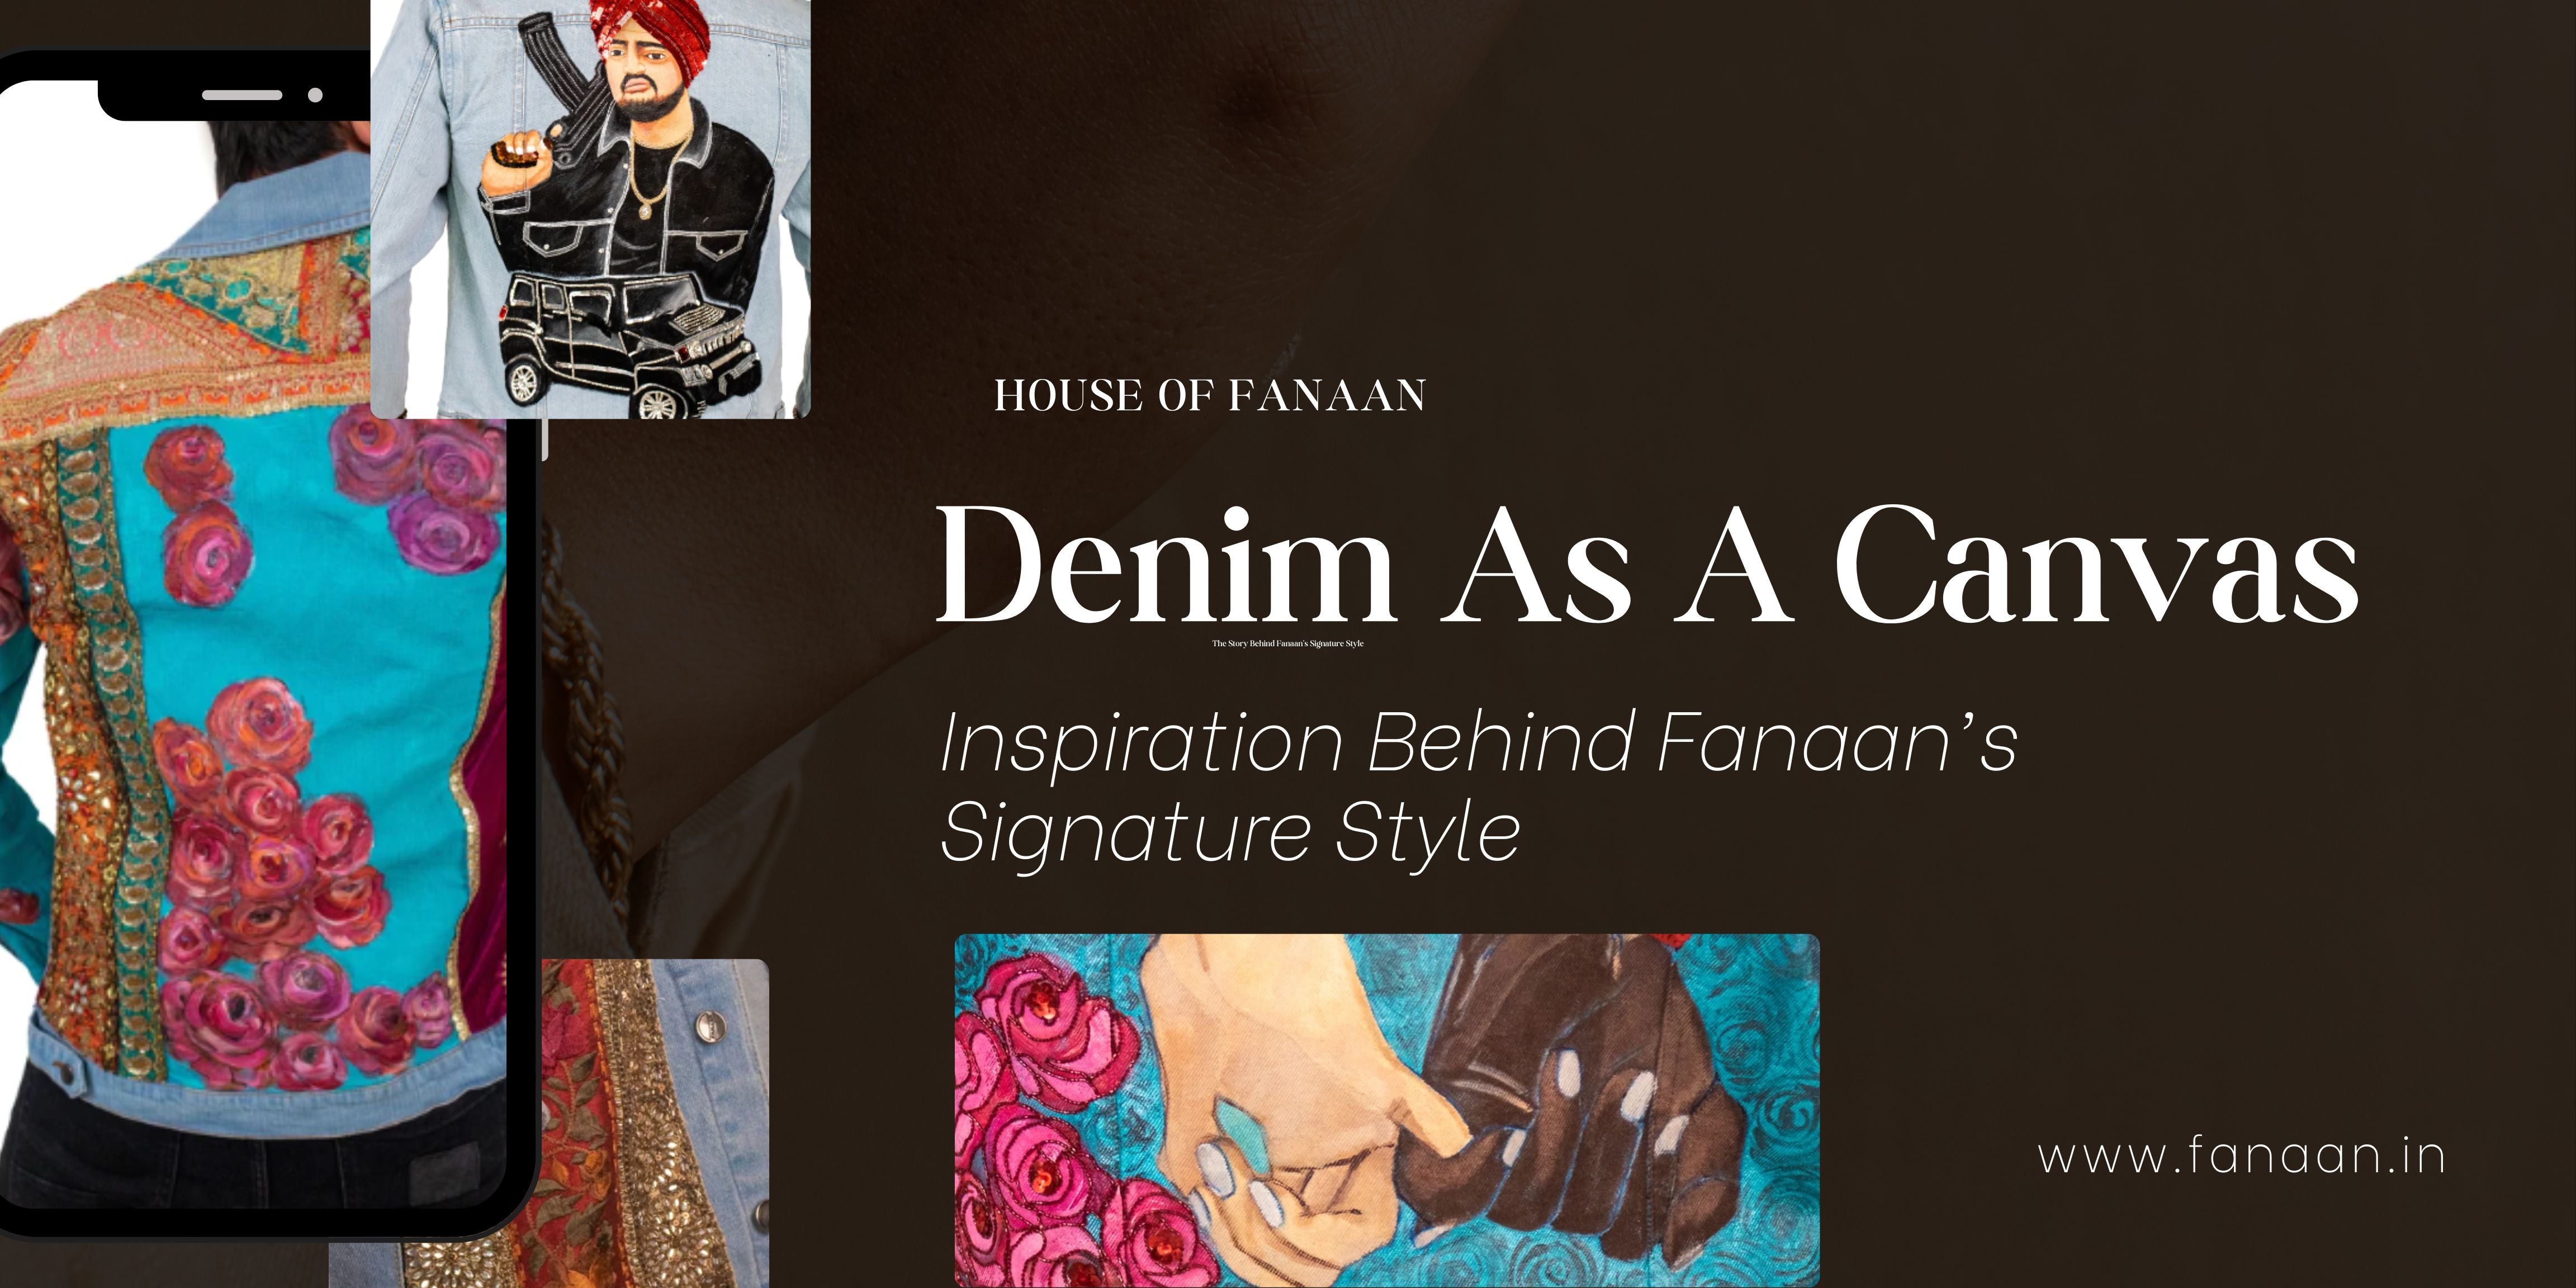 DENIM AS A CANVAS: INSPIRATION BEHIND FANAAN'S SIGNATURE STYLE